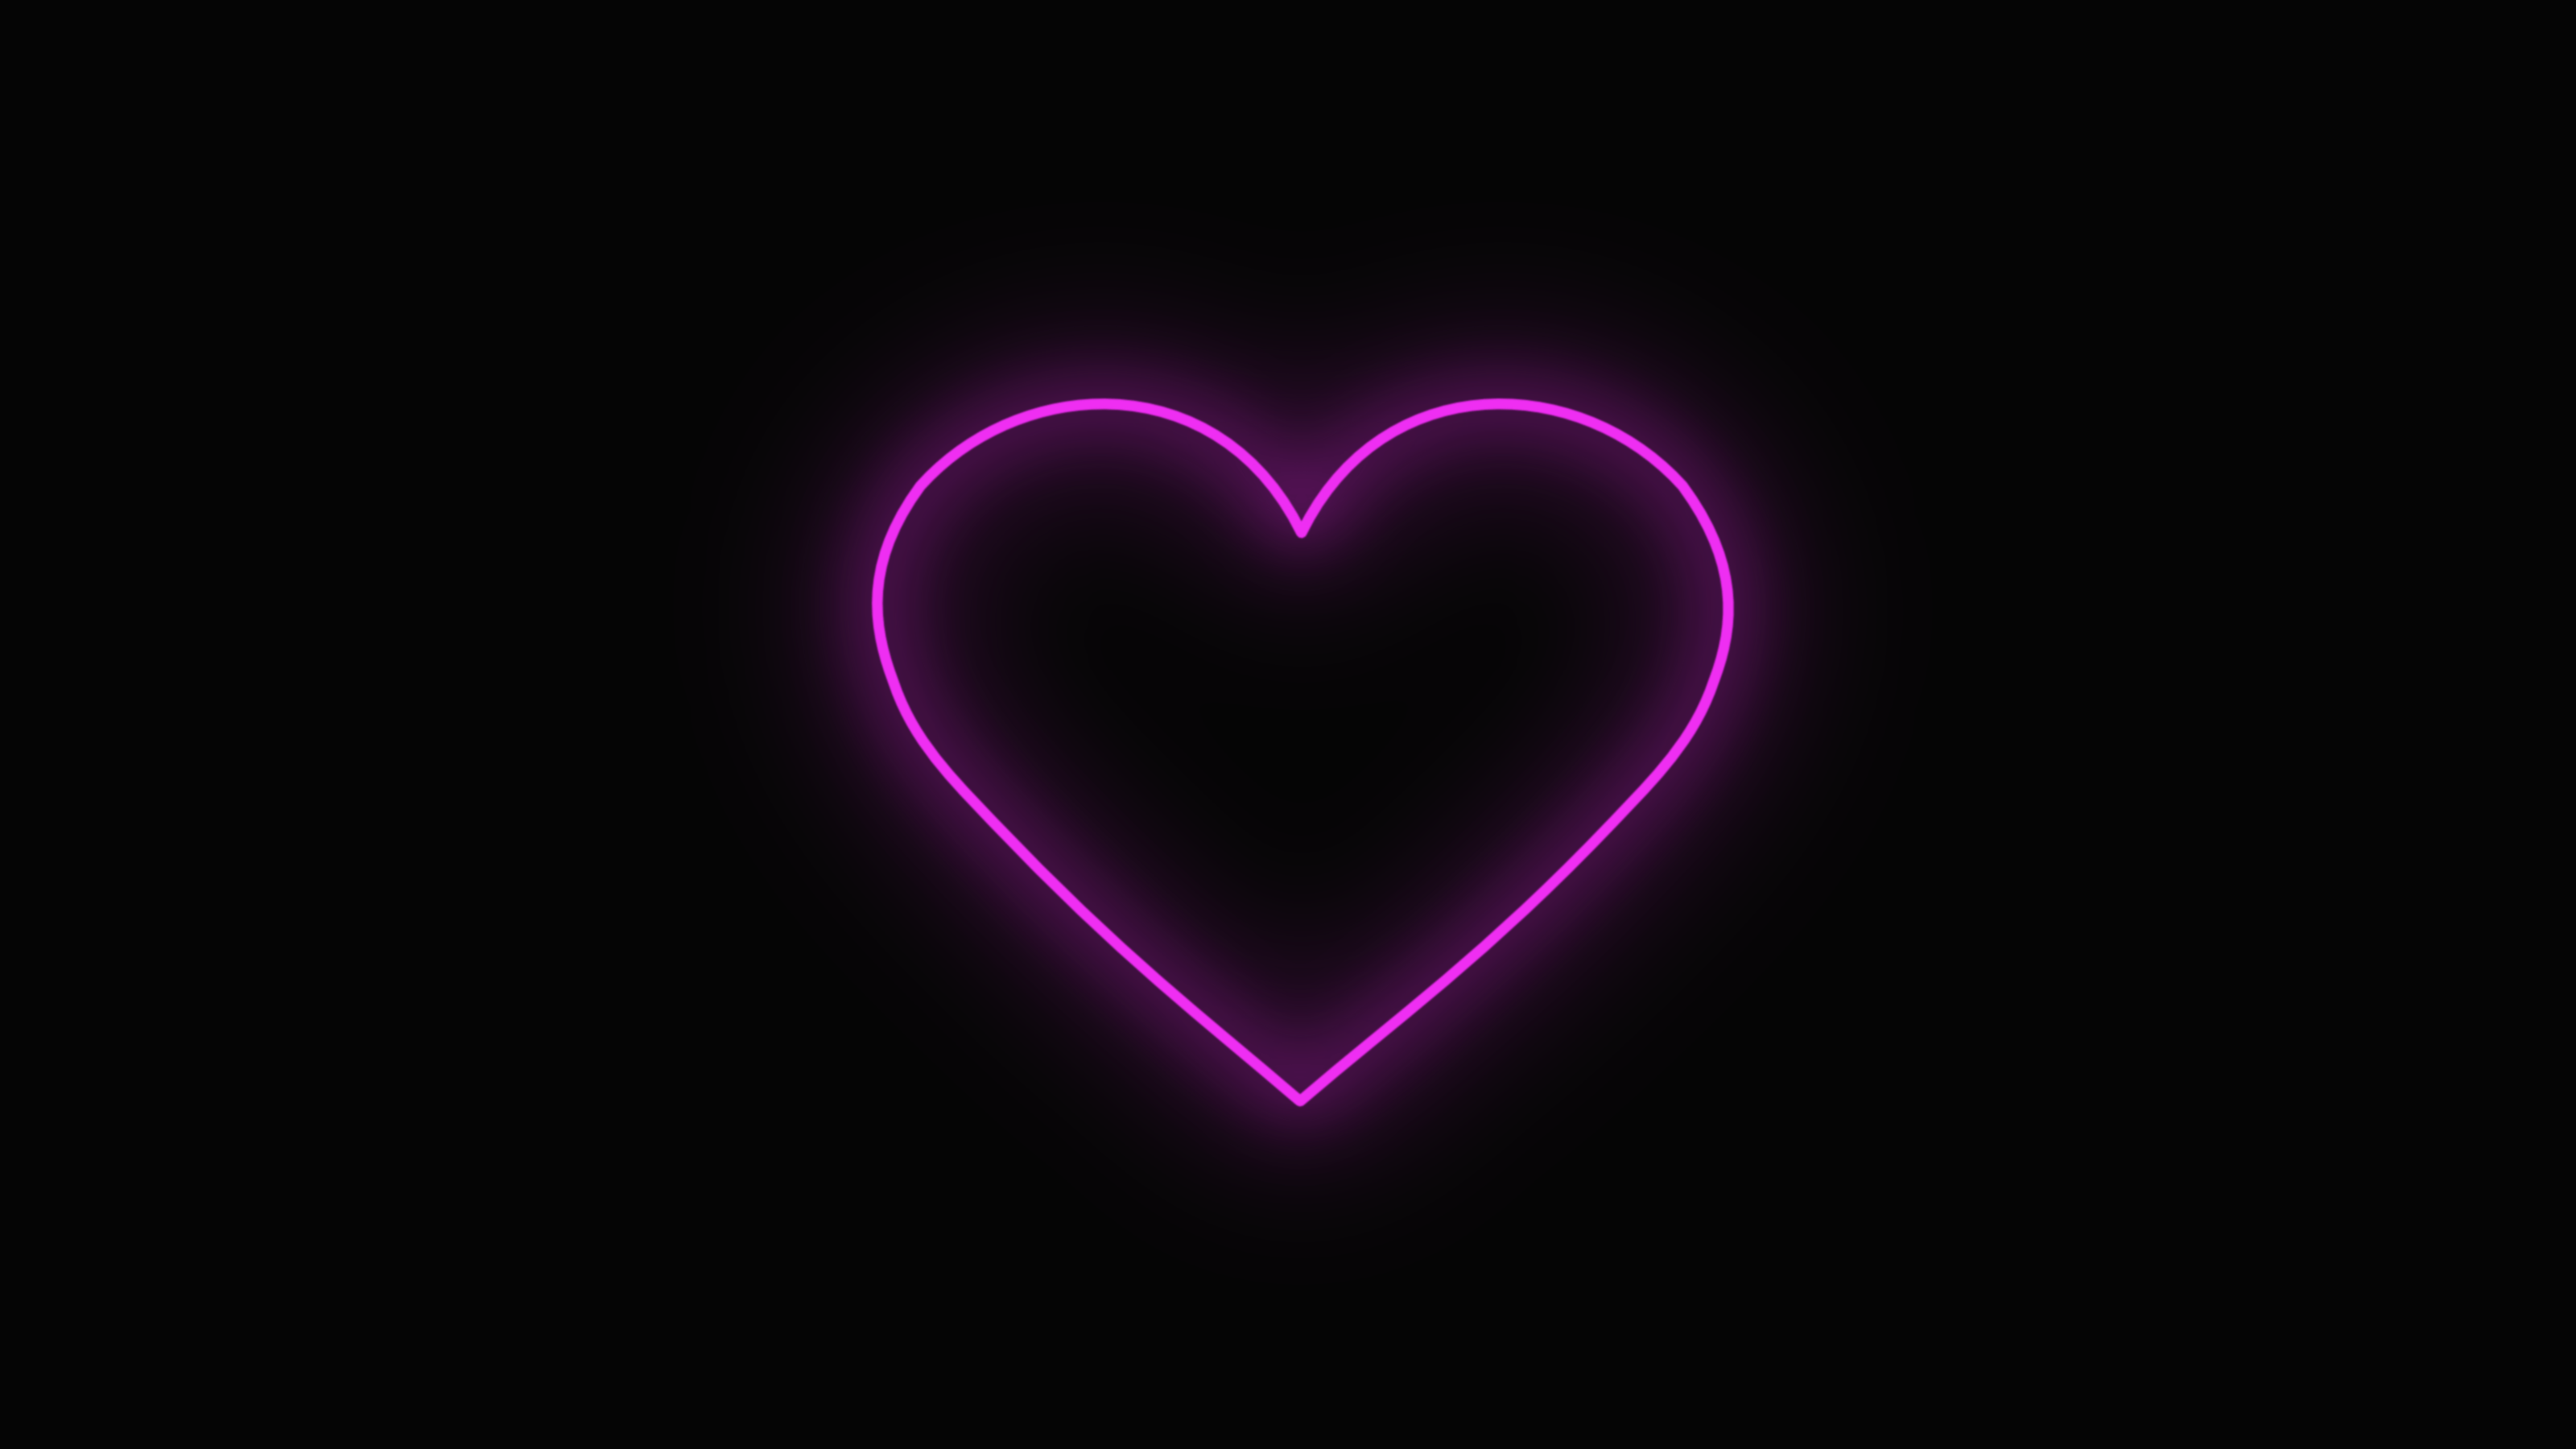 Black and Purple Heart Wallpapers - Top Free Black and Purple Heart ...